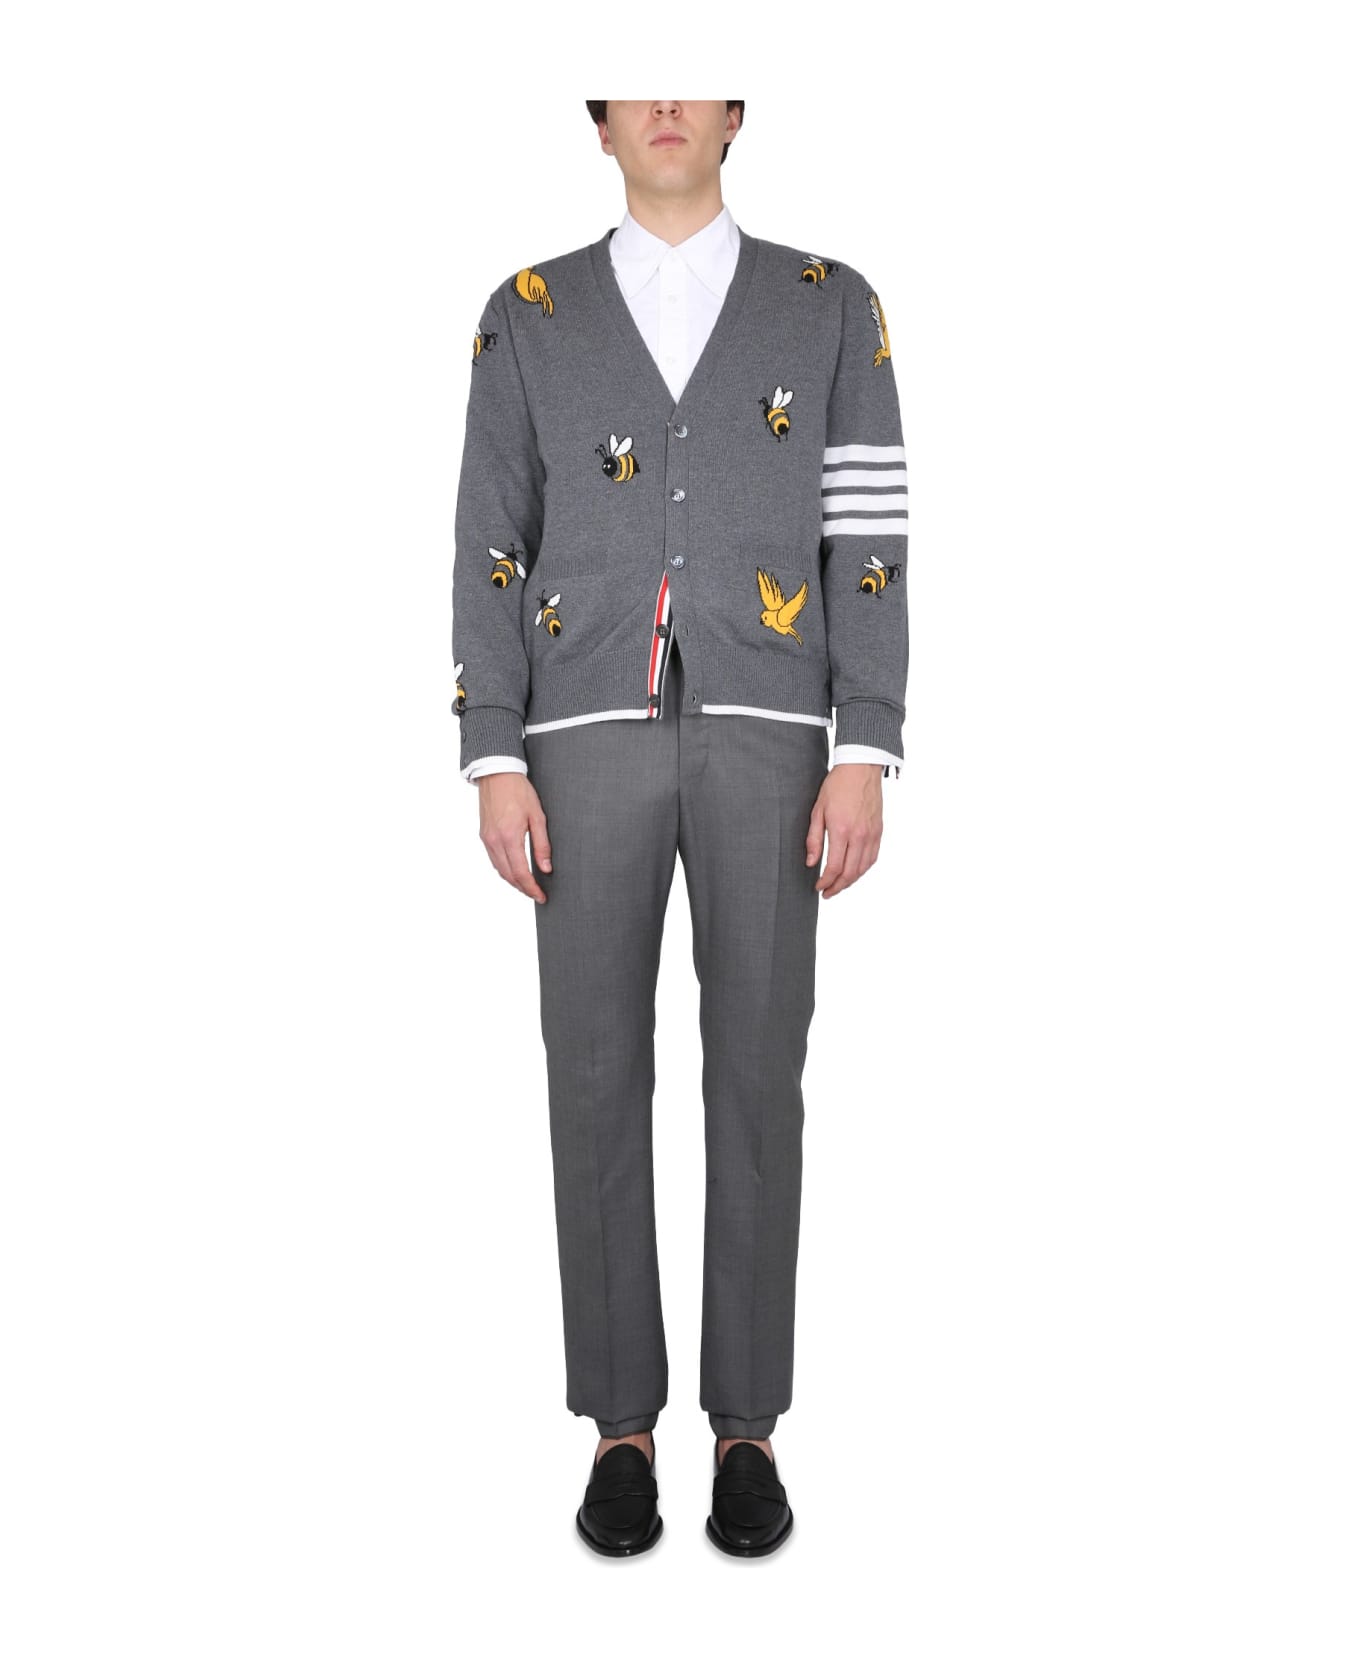 Thom Browne Cardigan With Birds And Bees Inlays - GRIGIO